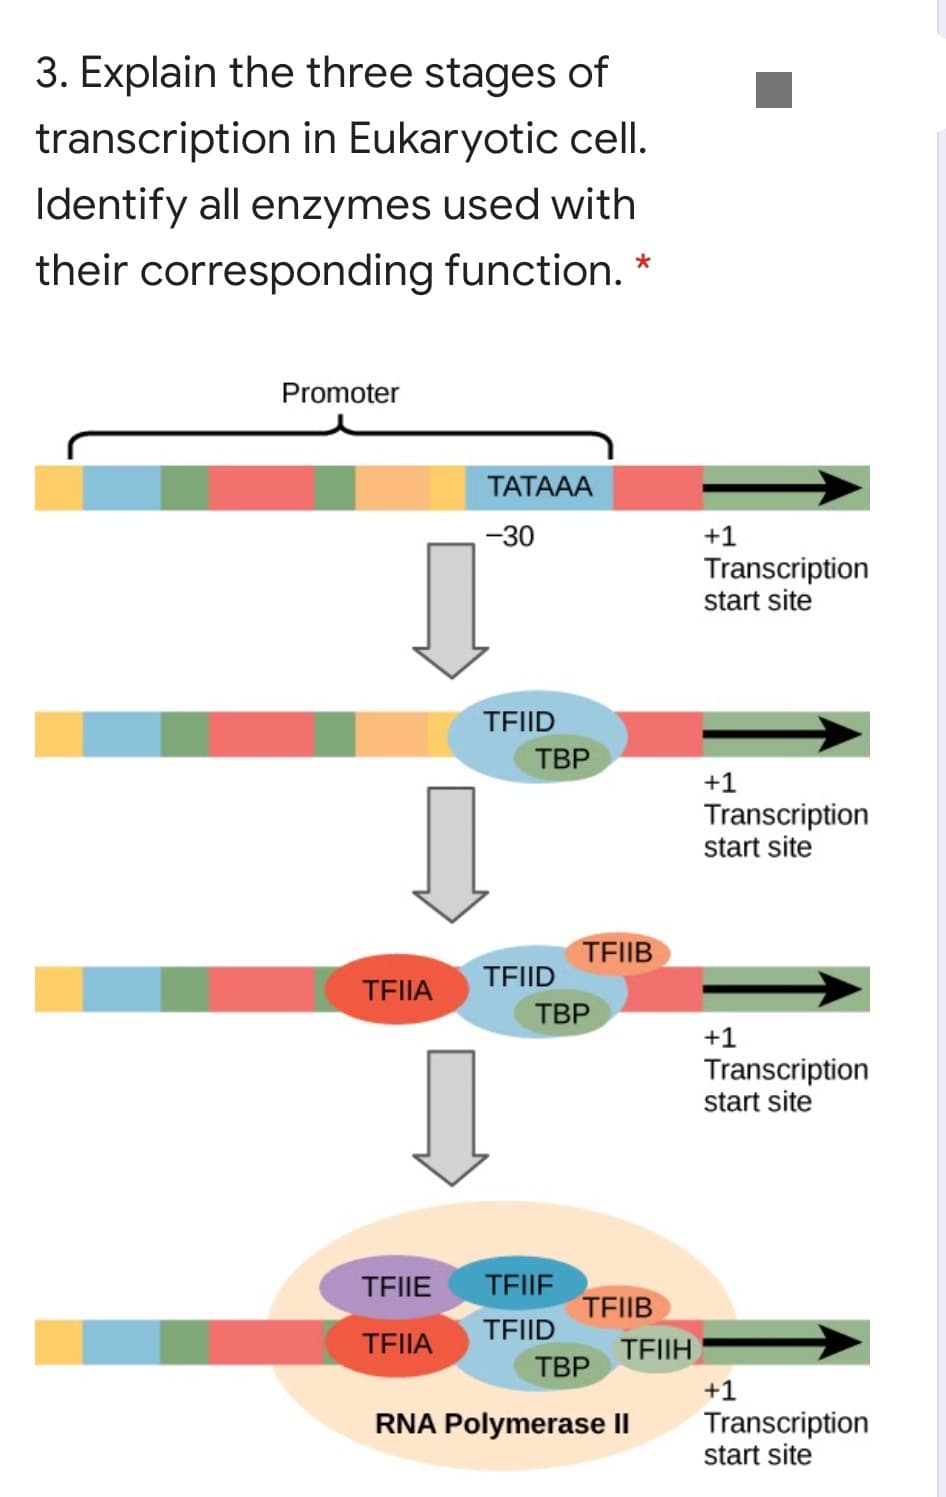 3. Explain the three stages of
transcription in Eukaryotic cellI.
Identify all enzymes used with
their corresponding function.
Promoter
ТАТАAА
-30
+1
Transcription
start site
TEIID
ТВР
+1
Transcription
start site
TEIIB
TEIID
TEIIA
ТВР
+1
Transcription
start site
TEIE
TEIIE
TEIIB
TEIID
TEIIA
TEIIH
ТВР
+1
Transcription
start site
RNA Polymerase II
